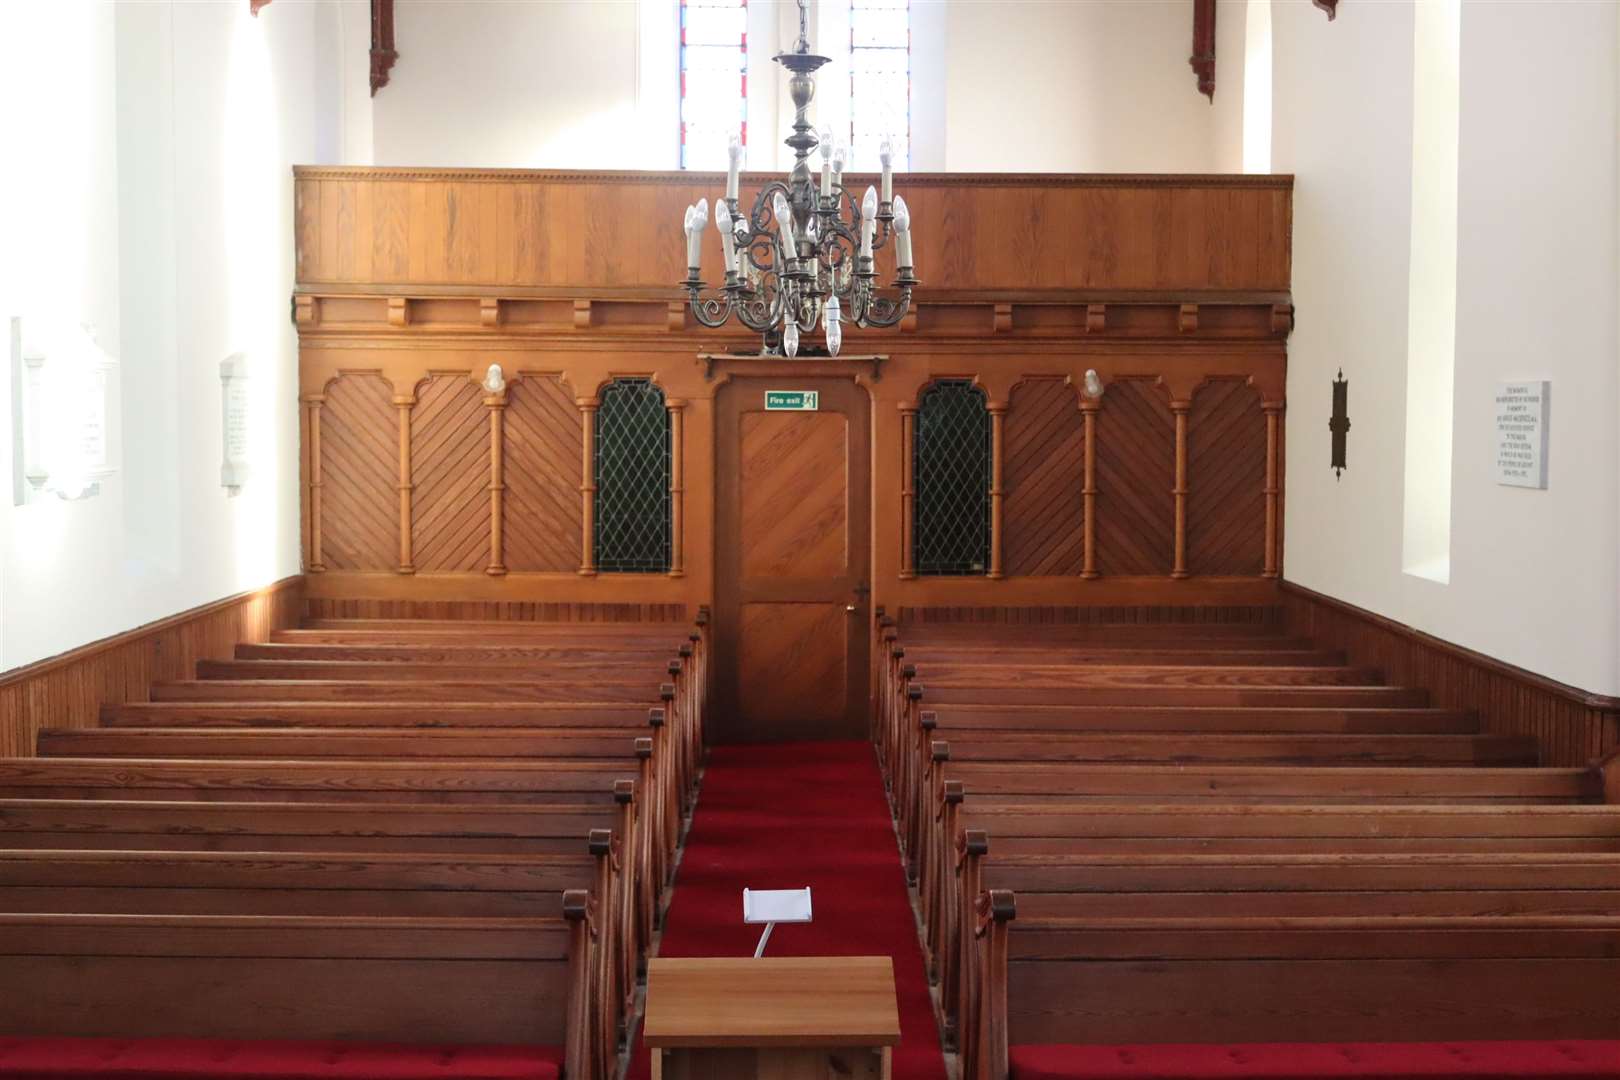 A new heating system has been installed under the pews, making the church more comfortable for worshippers.